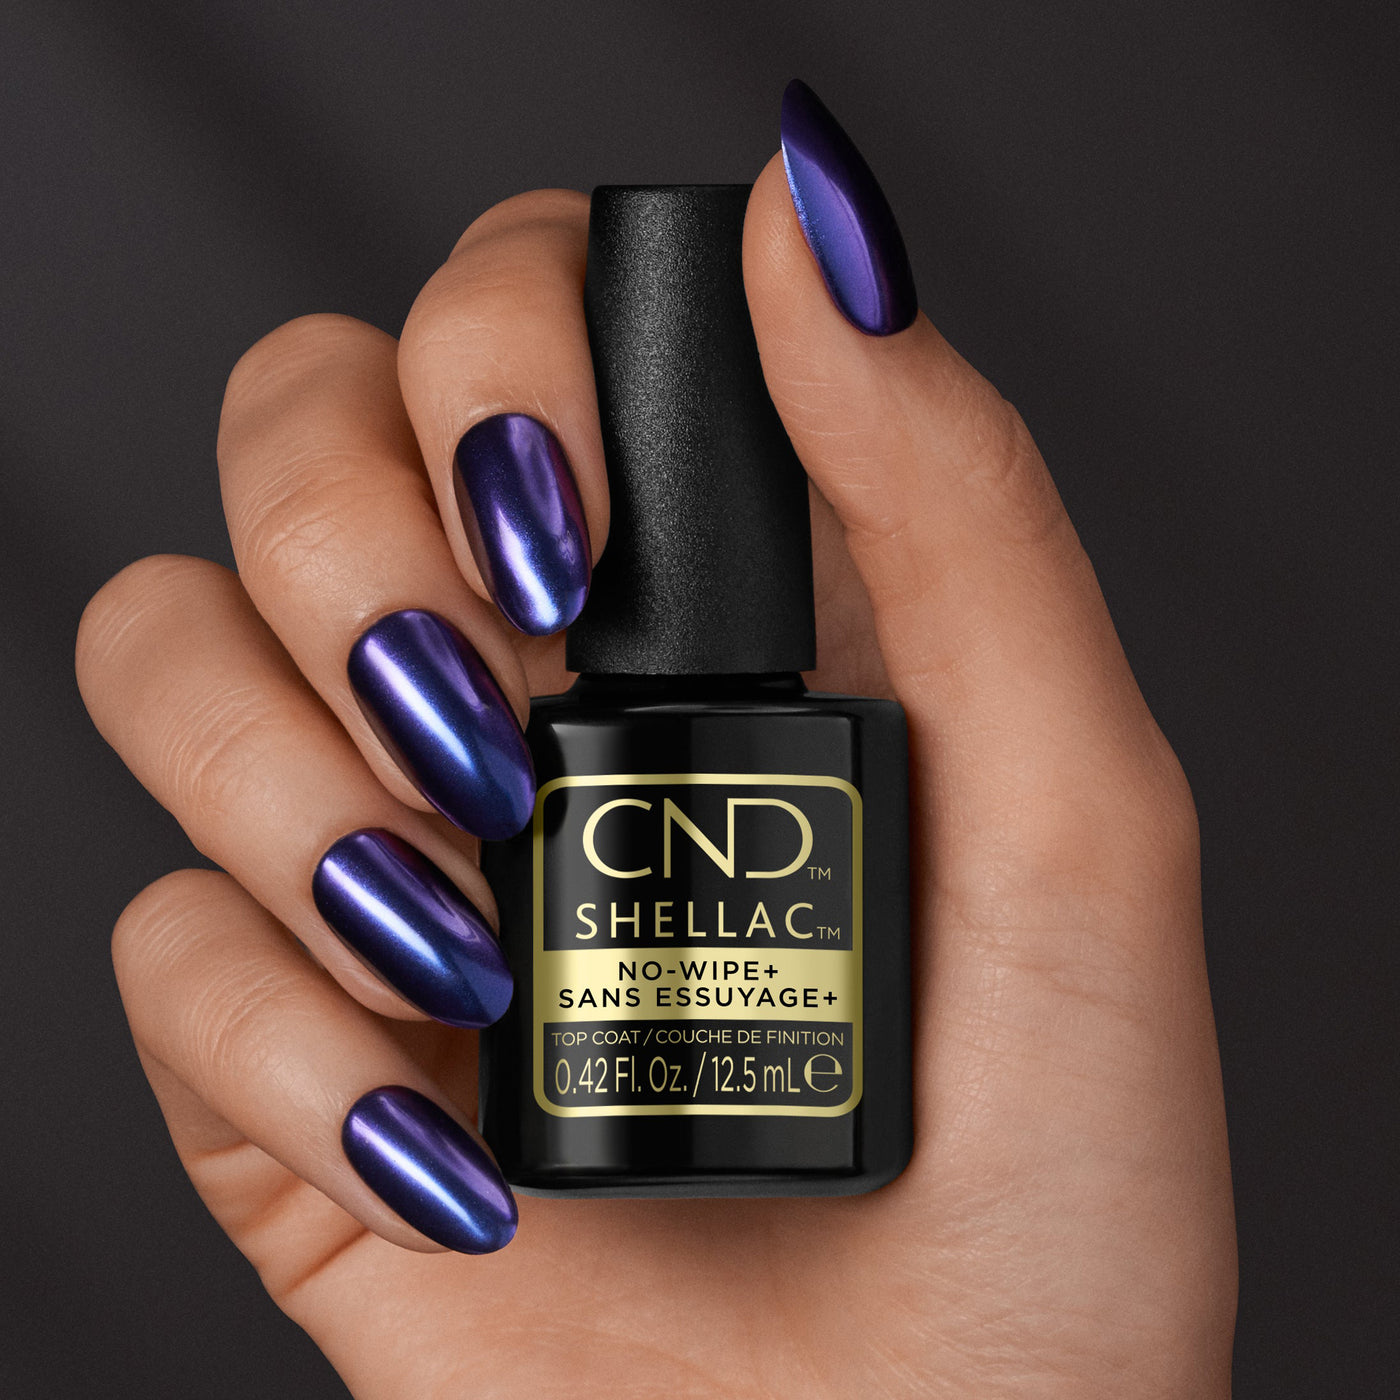 CND Shellac No-Wipe+ Top Coat (12.5ml) as held by model